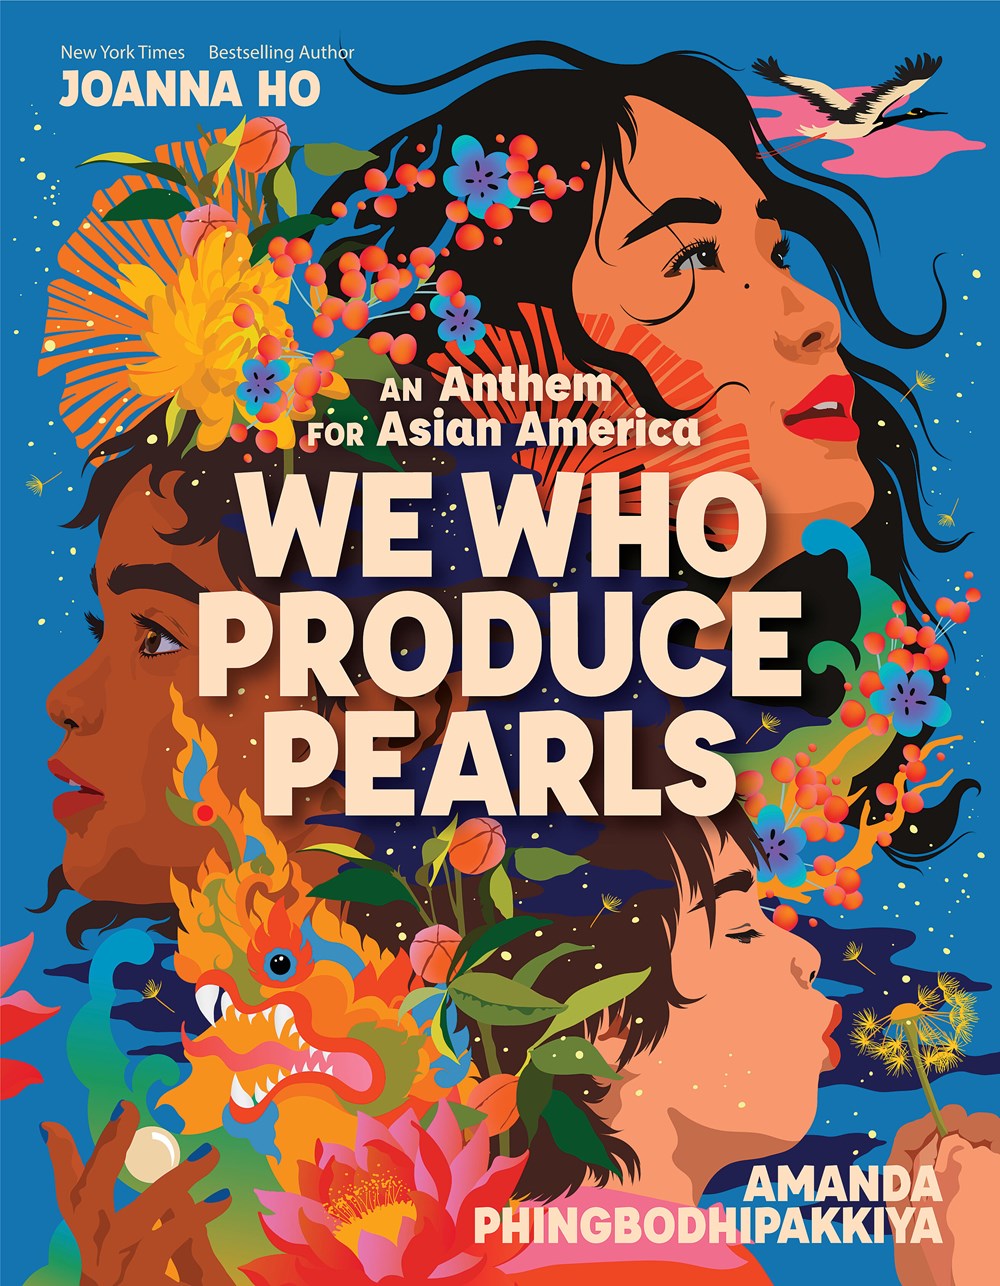 We Who Produce Pearls: An Anthem for Asian America  ﻿- Signed by the author